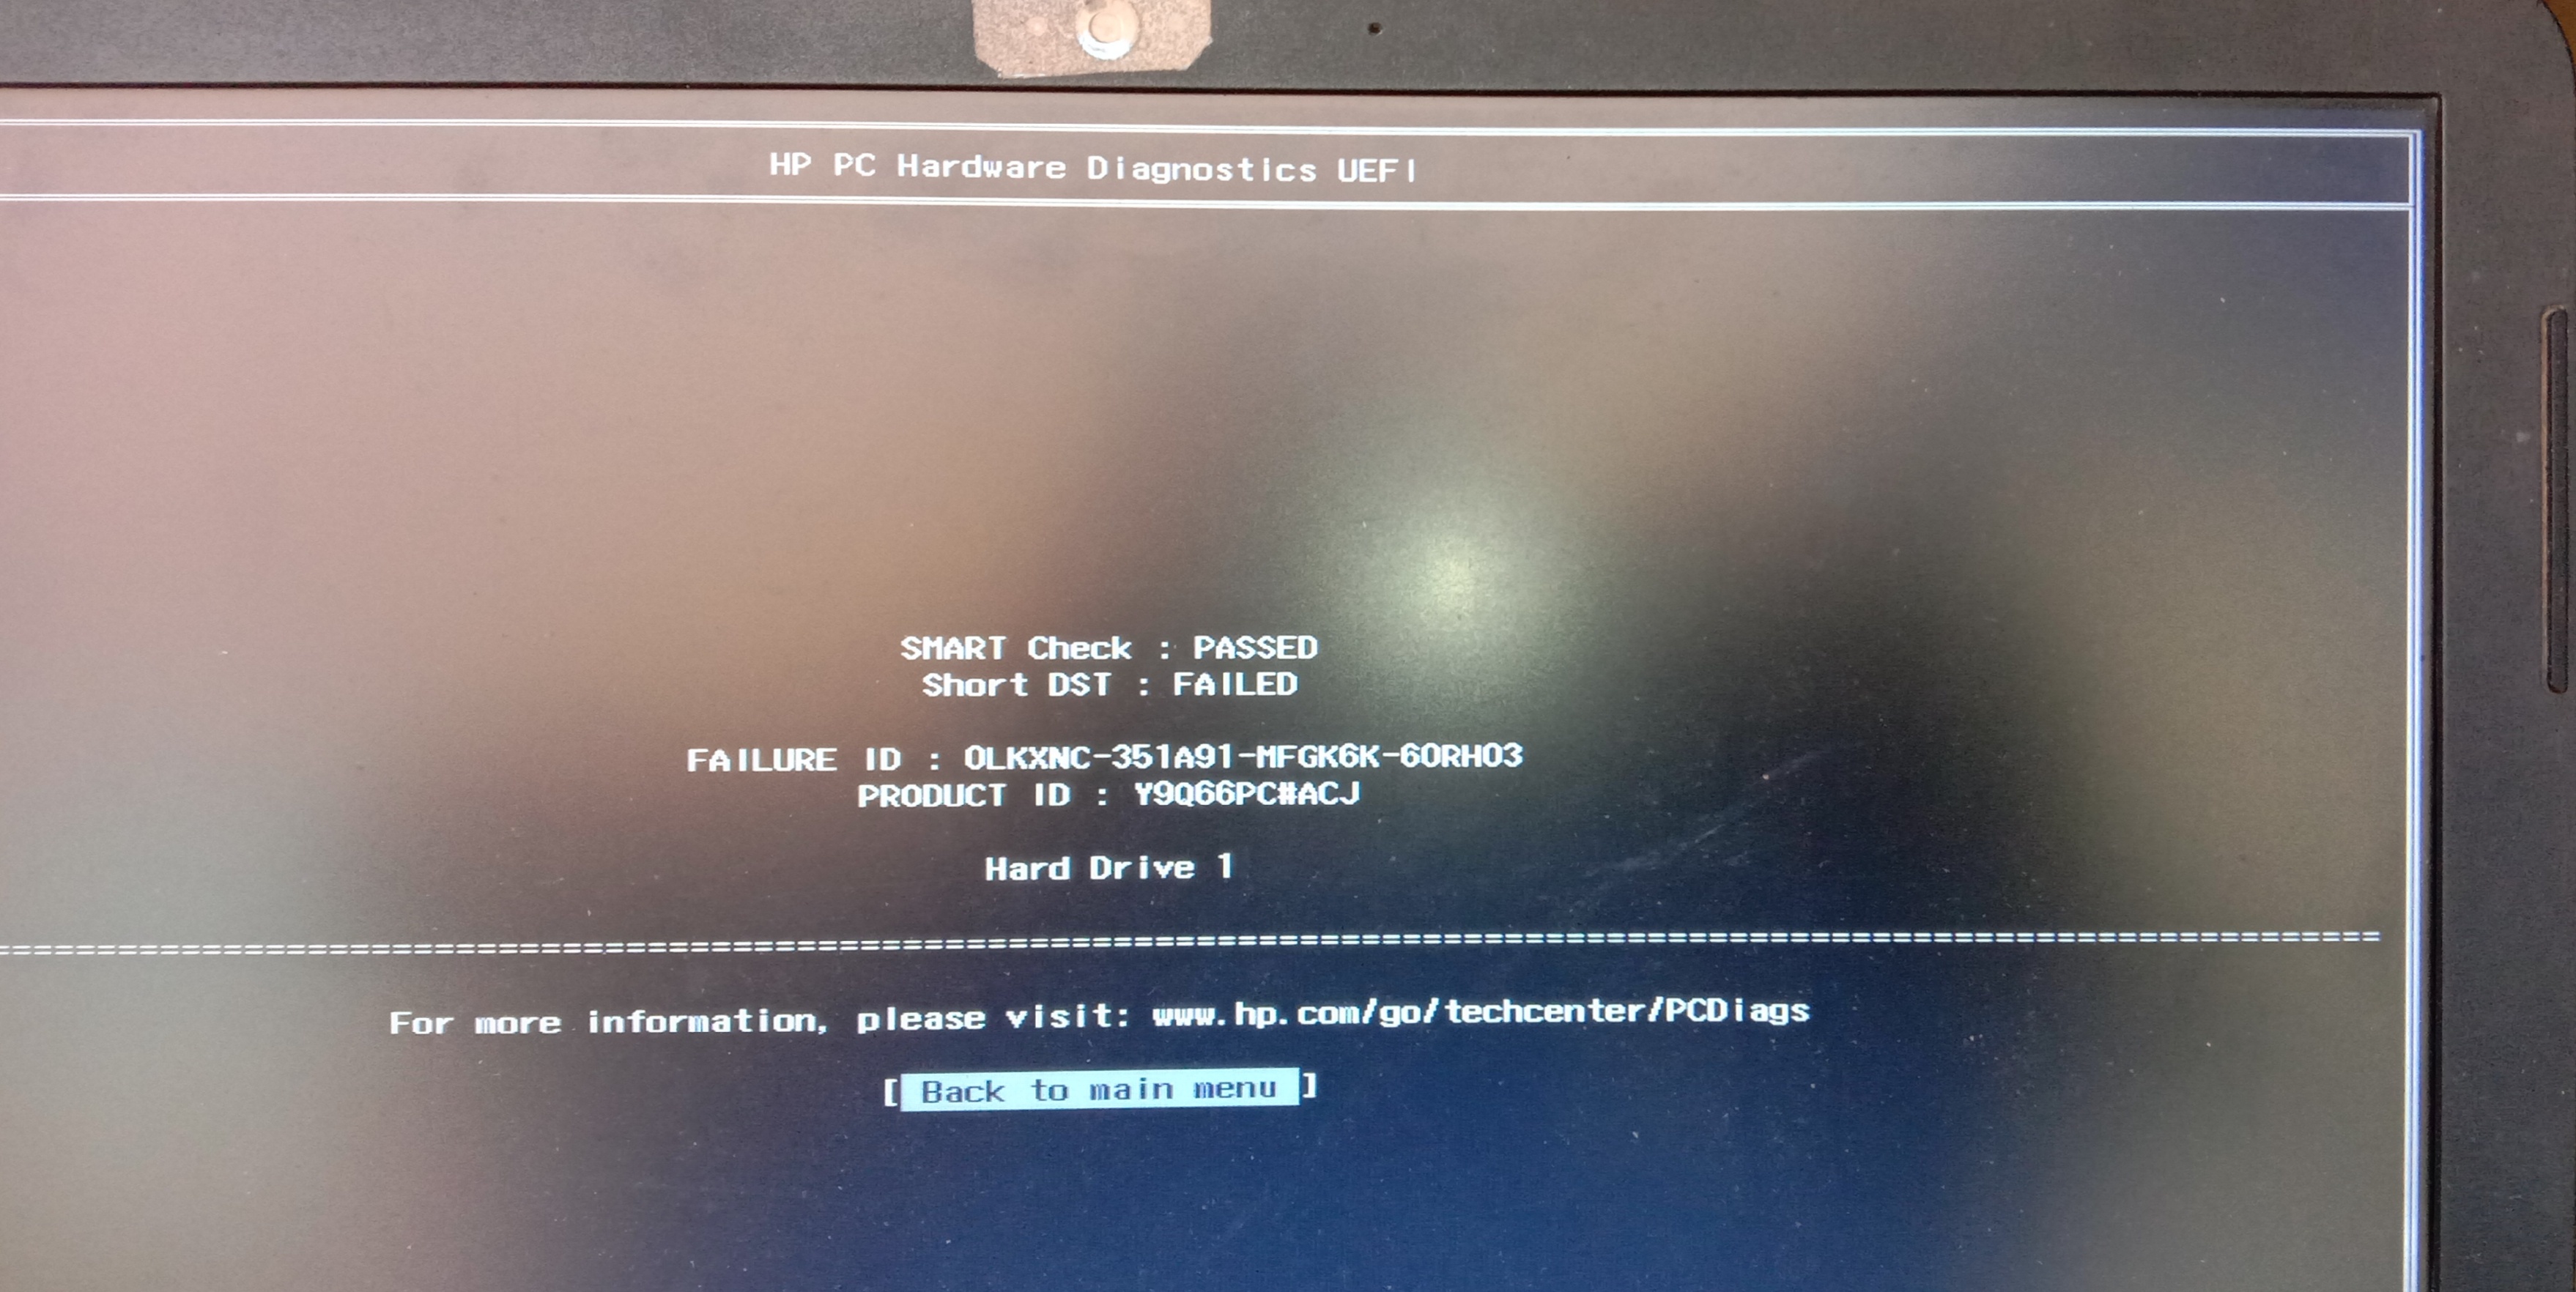 Hard Drive Short DST Test FAILED - HP Support Community - 7812952